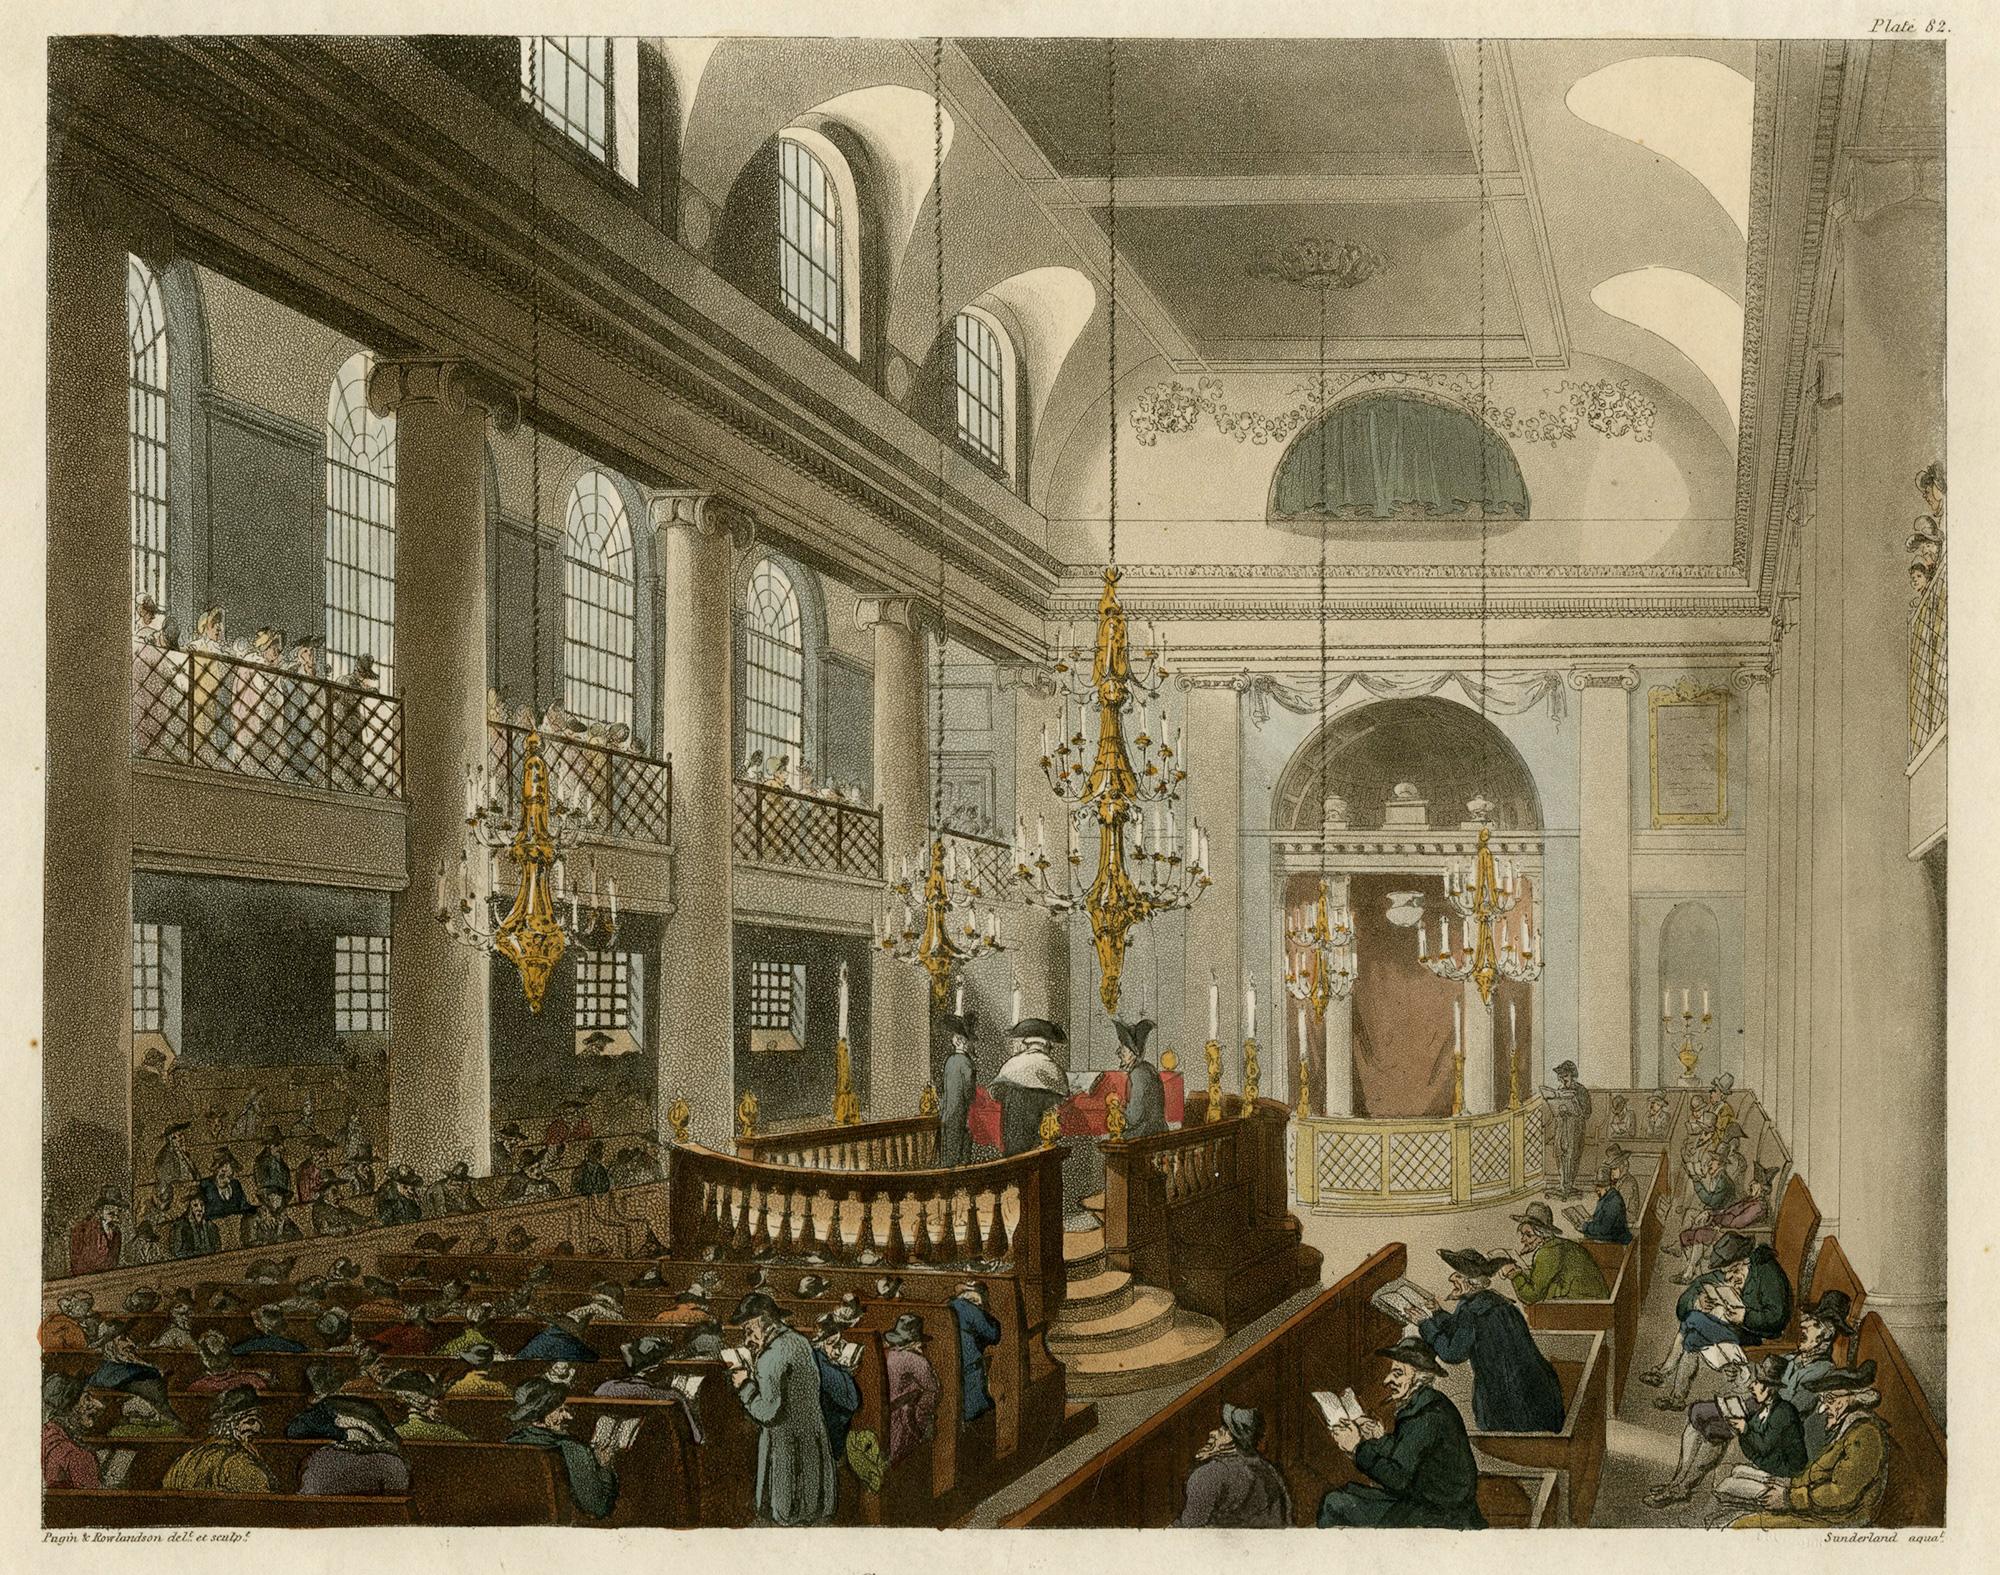 Synagogue Duke's Palace Houndsditch by Th. Sunderland after Pugin & Rowlandson